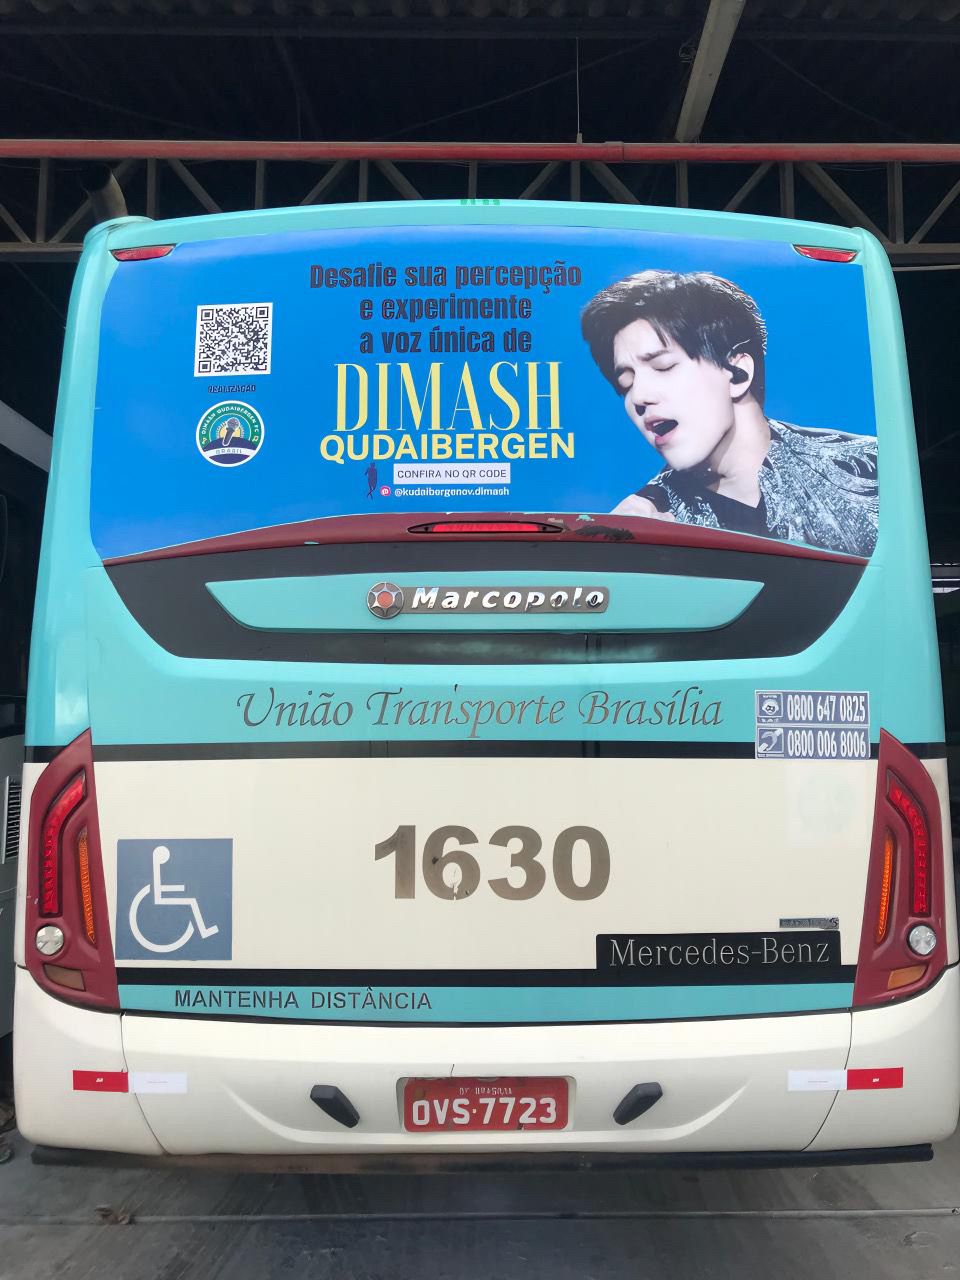 Buses with the image of Dimash appeared in two main cities of Brazil